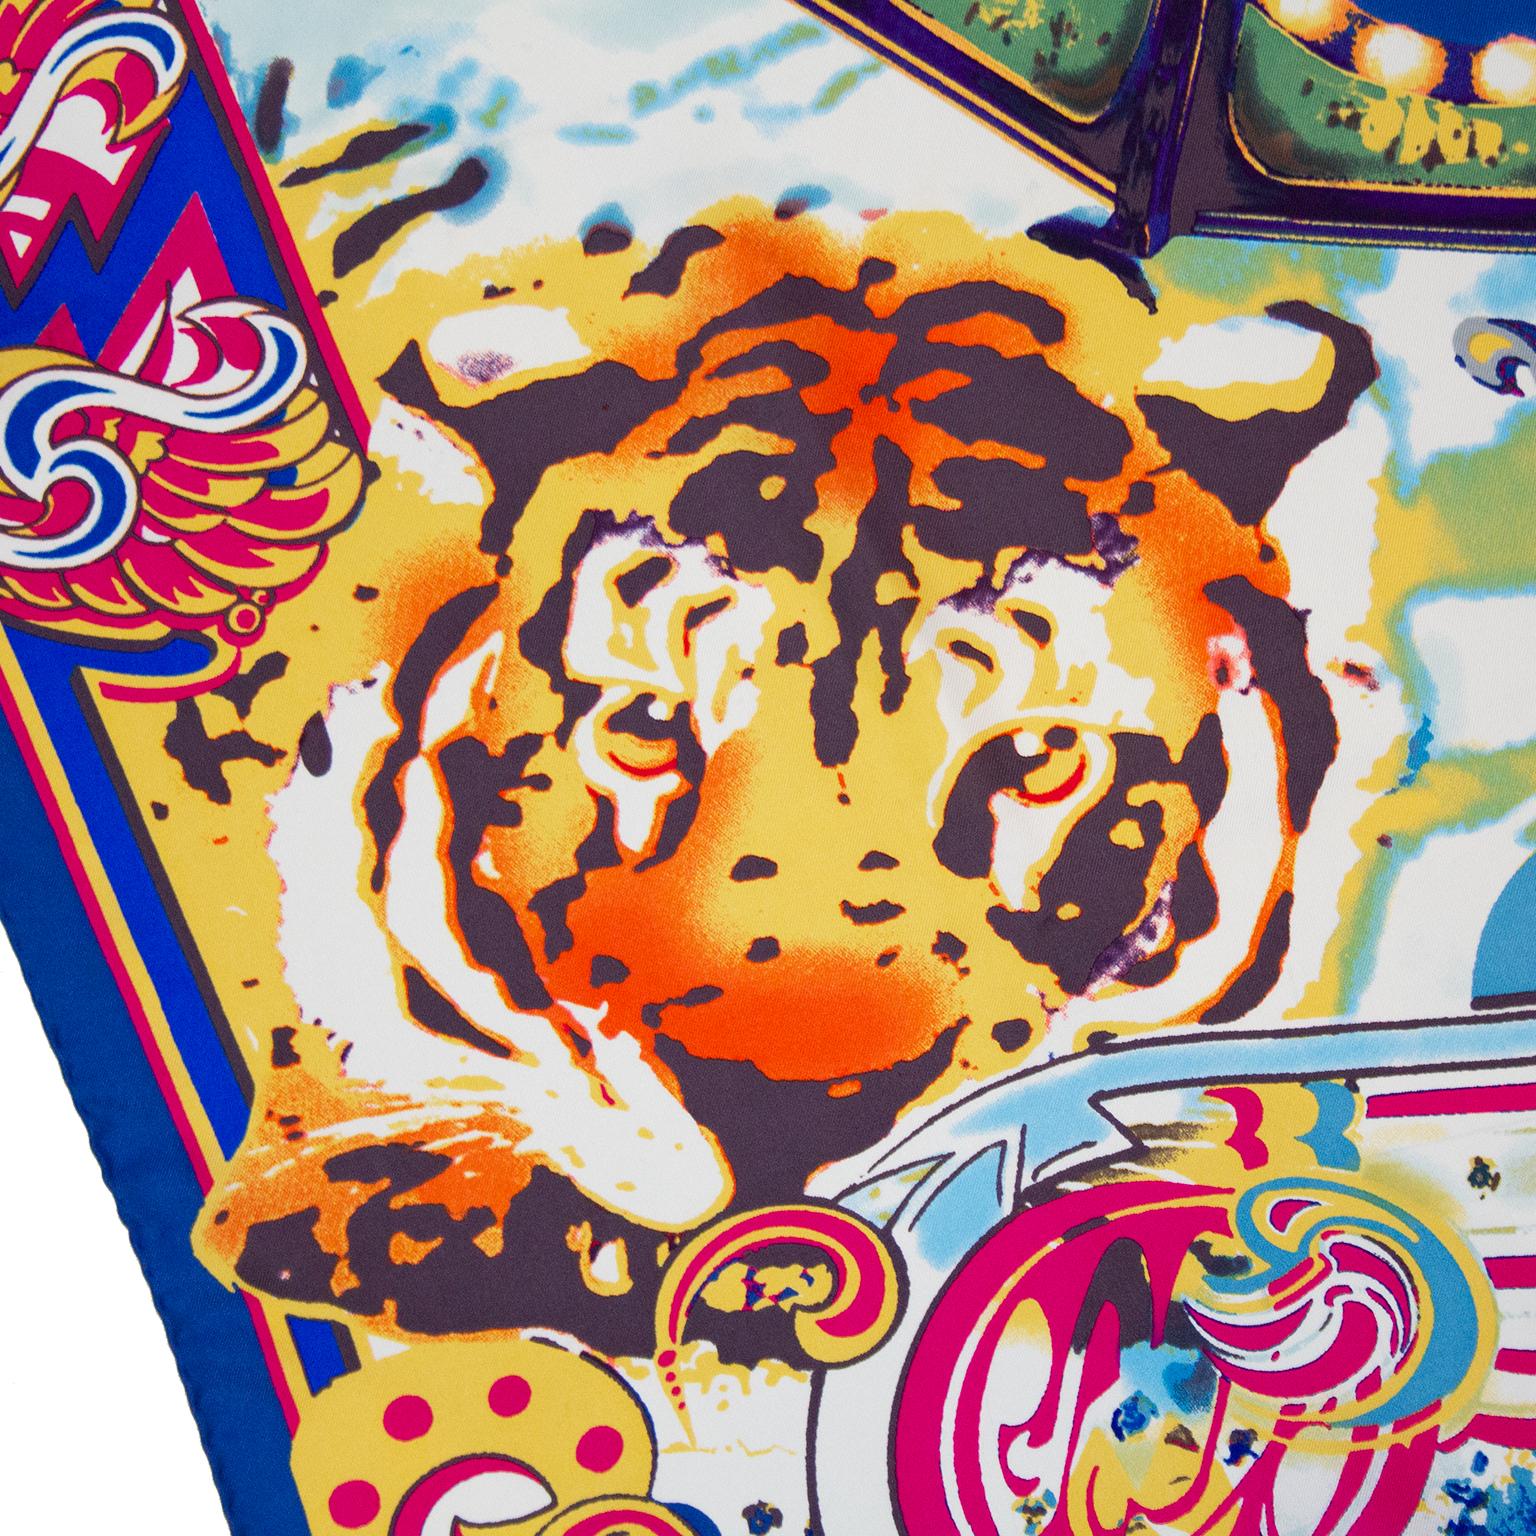 1990s Christian Lacroix square silk scarf. Multi color all over circus print featuring a tiger, merry-go-round, and a variety of traditional circus fun house advertising images . Christian Lacroix brand markings at bottom right corner. Hand sewn